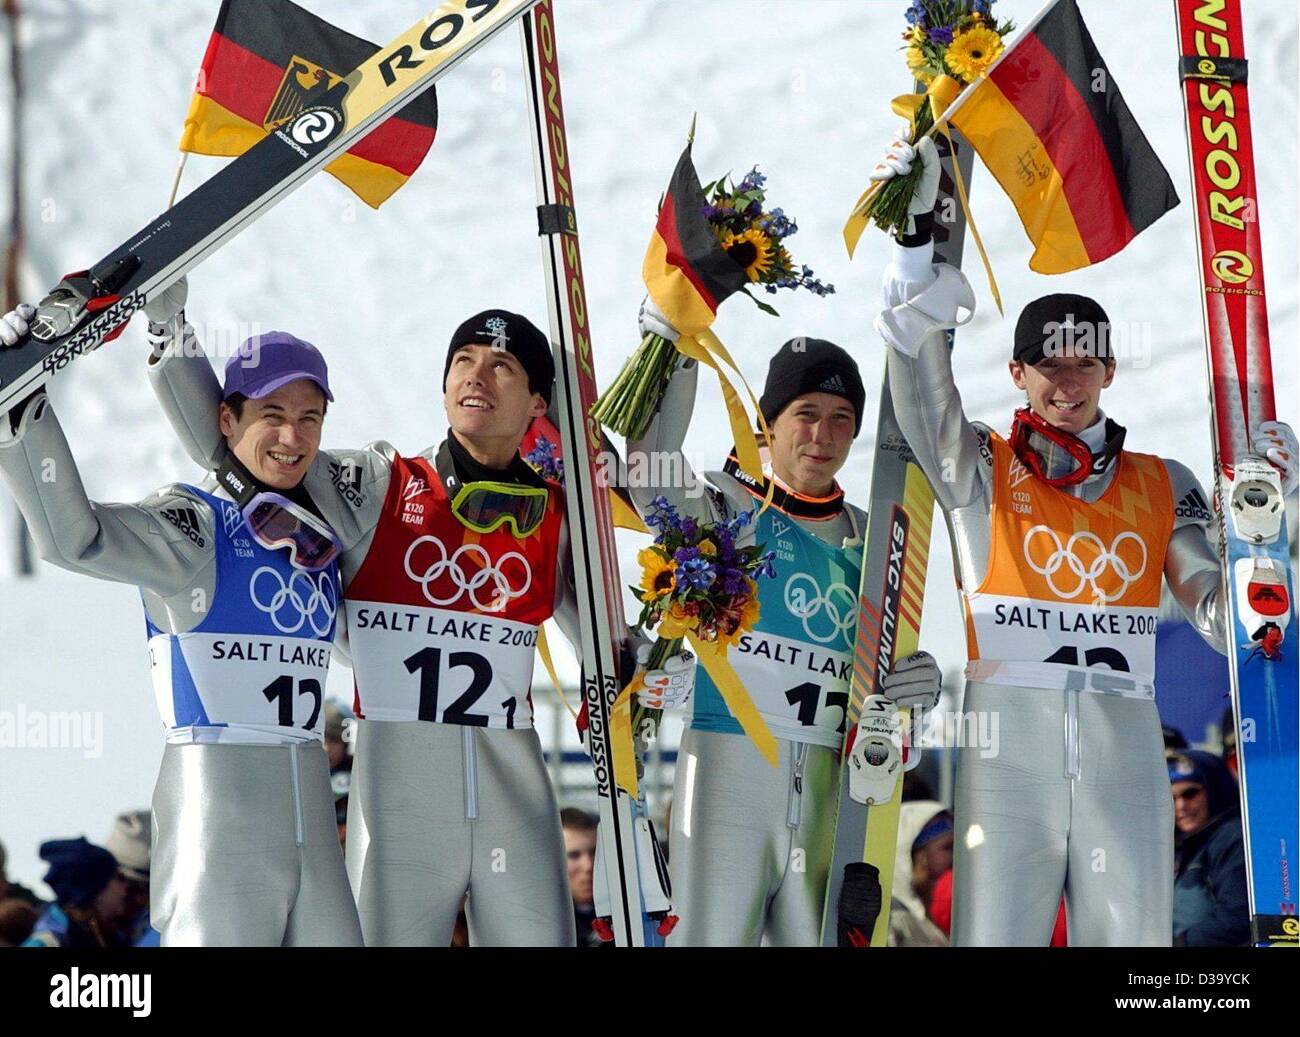 (dpa) - XIX Winter Olympic Games: The German K120 Ski-jumping team, (l-r) Martin Schmitt, Sven Hannawald, Stephan Hocke and Michael Uhrmann, celebrate their victory waving flags, flowers and their ski during the flower ceremony at the Utah Olympic Park, 18.2.2002, at the Olympics in Salt Lake City.  Stock Photo